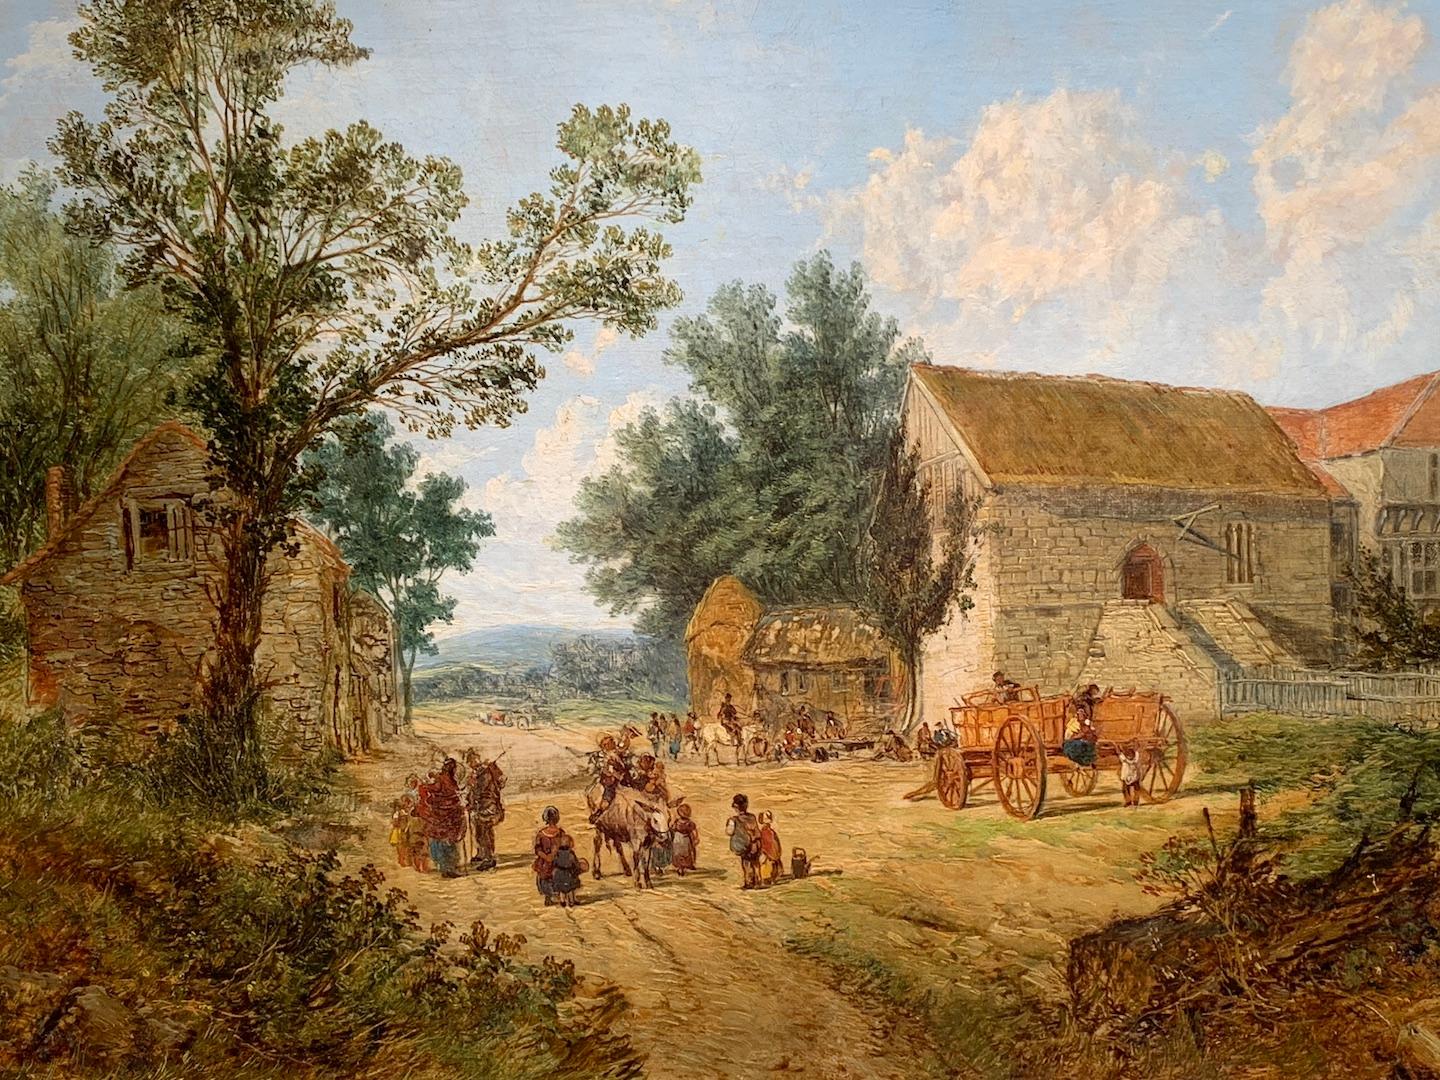  Antique Oil of an English Village landscape, with horses, people, a pub. - Painting by John Holland Senior